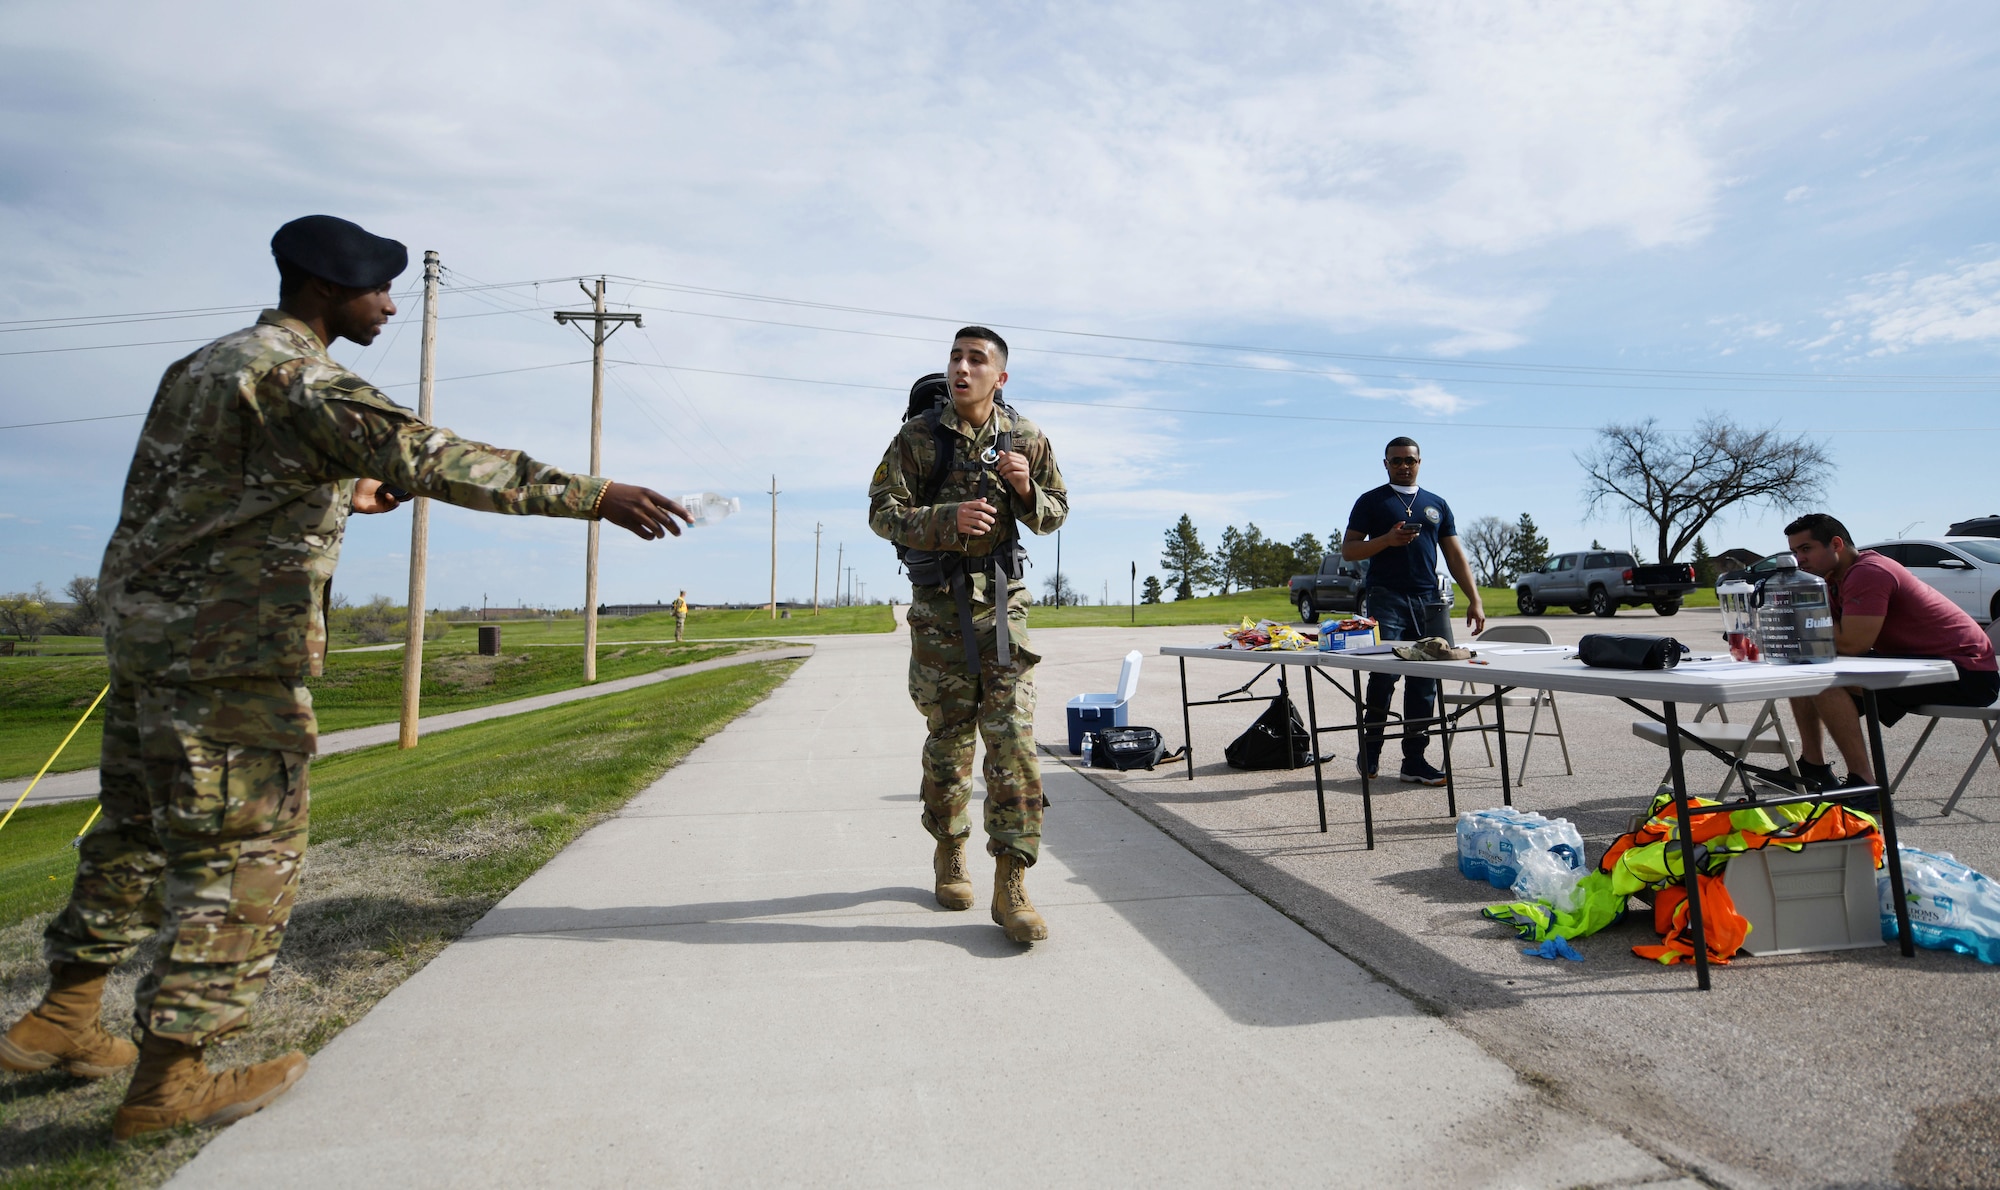 Senior Airman Charles Williams, a 28th Security Forces Squadron response force team member, hands water to Senior Airman Michael Sexton, a 28th Munitions Squadron munitions storage crew member, during the Police Week Ruck Challenge at Heritage Lake on Ellsworth Air Force Base, S.D., May 13, 2019.  Sexton competed the ruck in memory of Deputy Mark Stasyuk, of the Sacramento County Sheriff’s Office, and Officer Natalie Corona, of the Davis Police Department, both in California. (U.S. Air Force photo by Airman 1st Class Christina Bennett)